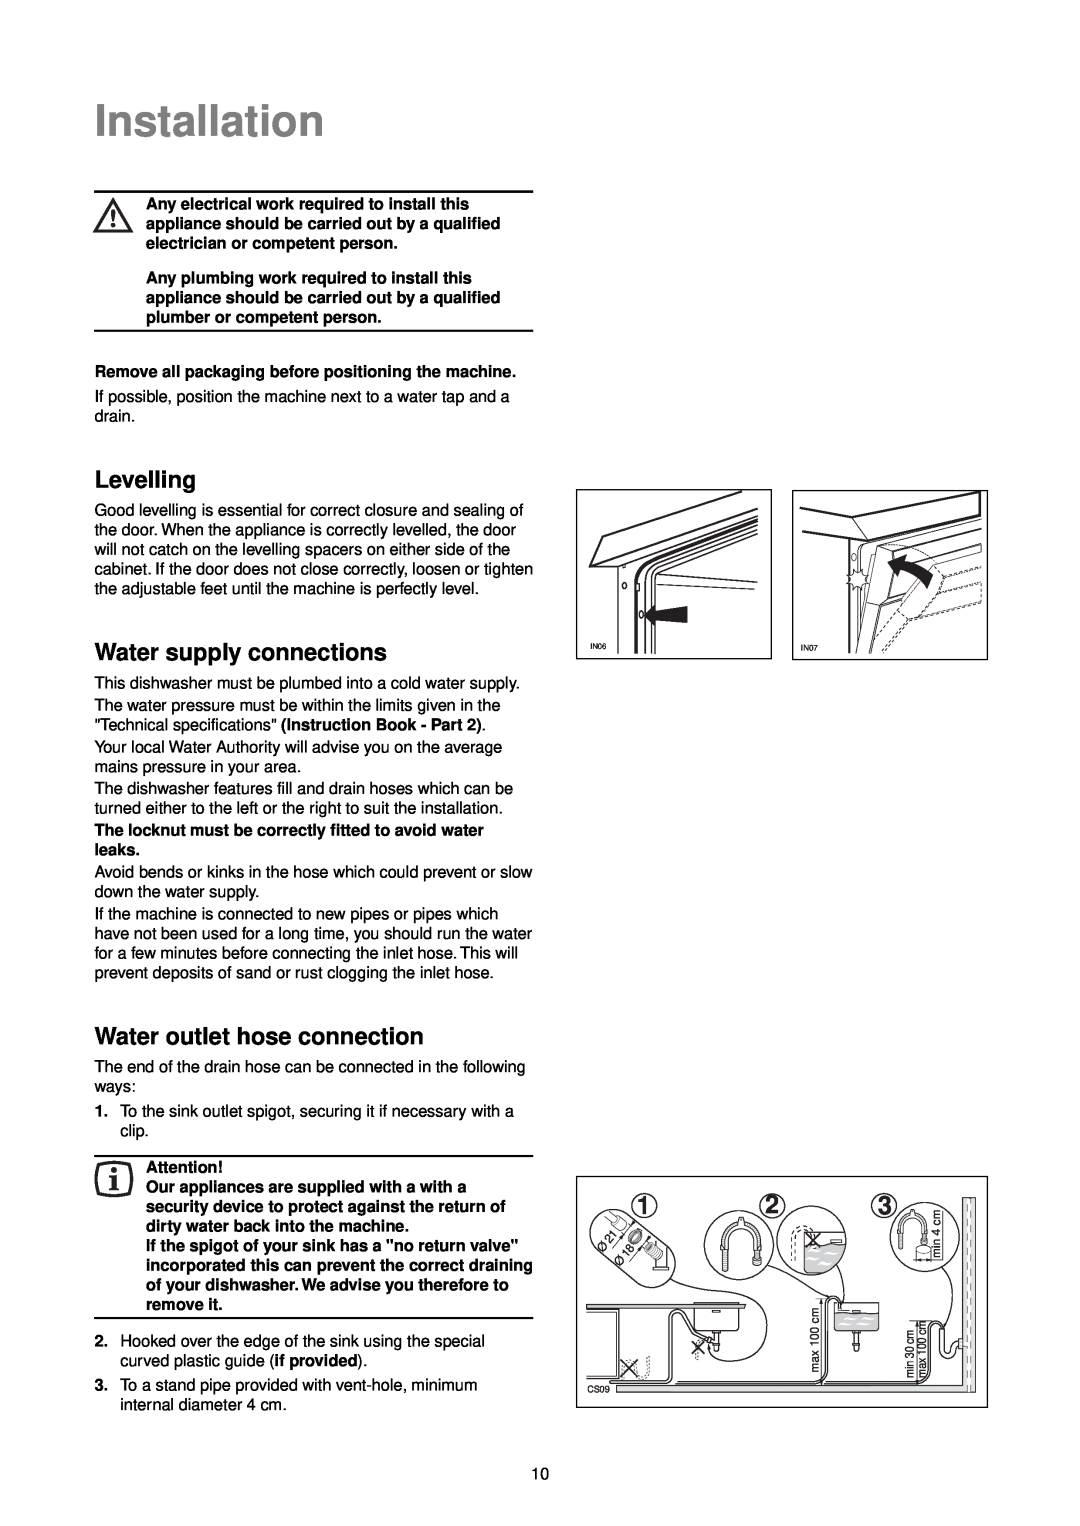 Zanussi ZT 695 manual Installation, Levelling, Water supply connections, Water outlet hose connection 